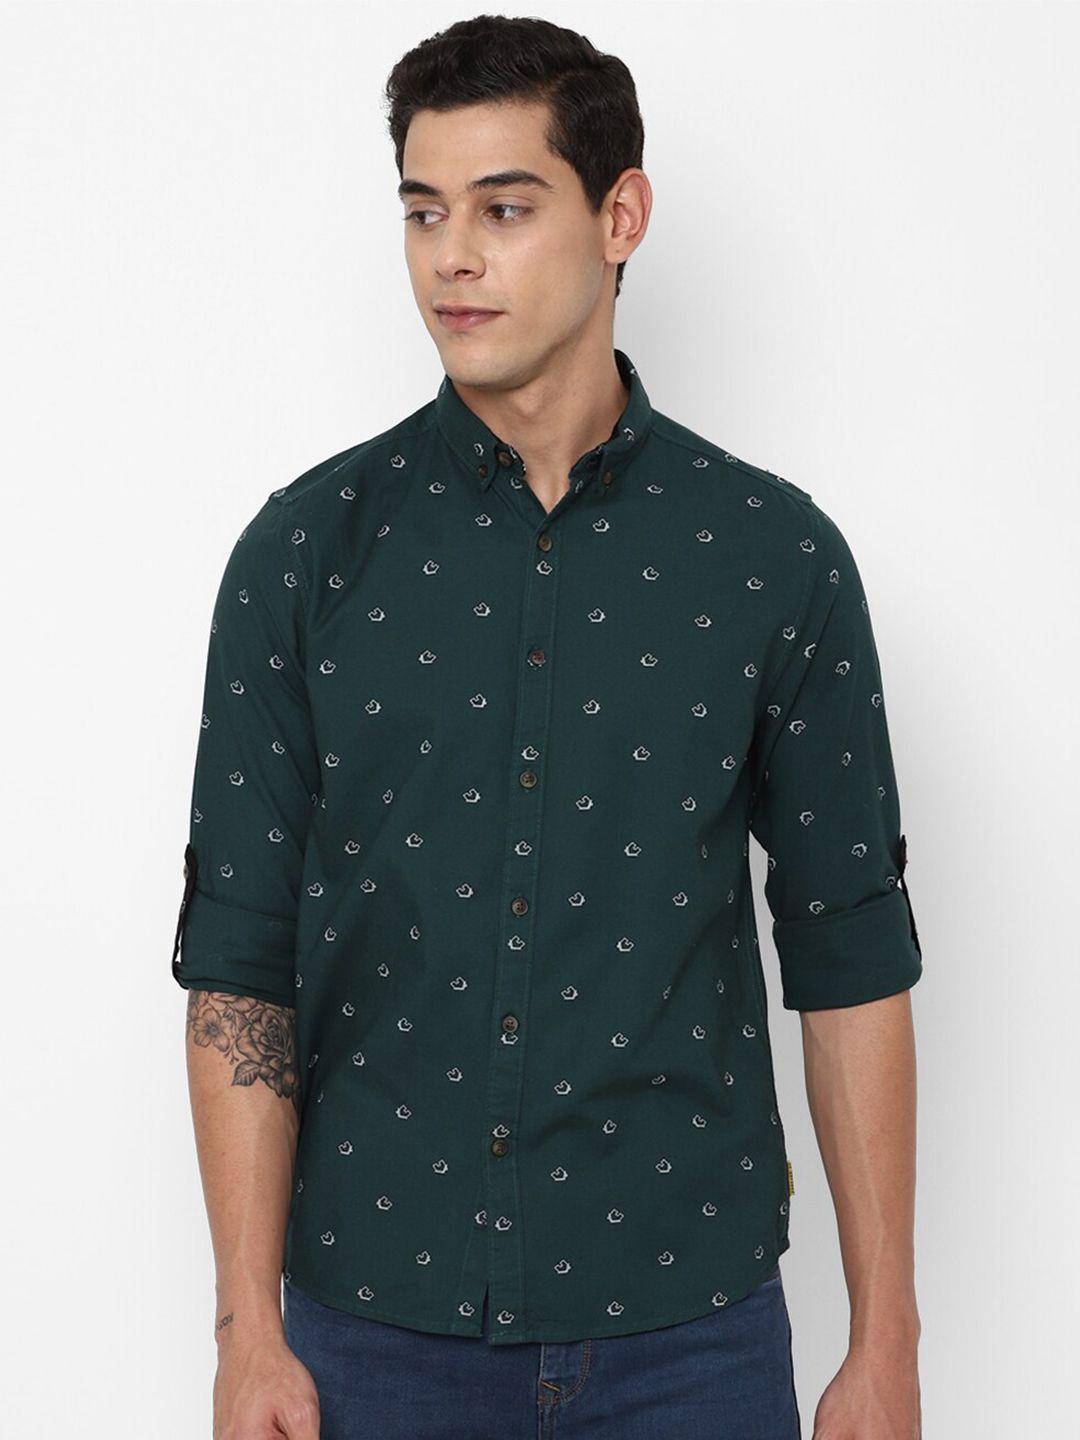 forever-21-men-green-printed-pure-cotton-casual-shirt